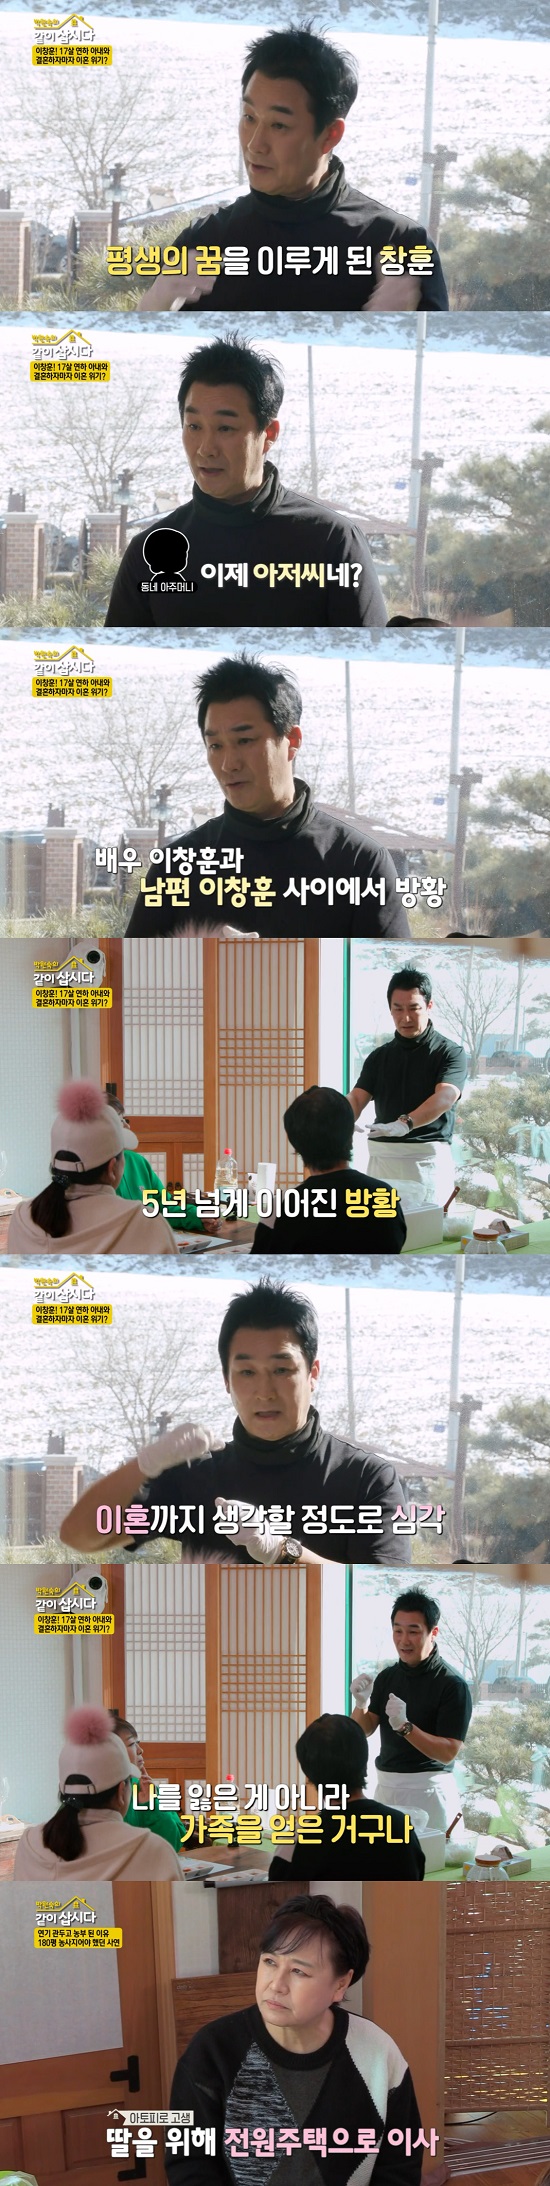 Actor Lee Chang-hoon appeared on KBS 2TV Lets Live With Park Won-sook Season 3 broadcast on the 16th.Lee Chang-hoon said, My dream was marriage. When I was a child, I was the most envious of my fathers death, and it was the back of the friends who took my parents hands in both hands.I was lonely even if I had both money and popularity, he said. I lived alone in an 80-pyeong house. I filled the furniture with billions.In the end, I sleep in a sofa with a good saliva  0. The sofa is turned off. Lee Chang-hoon said, It was my goal to marriage, he said. I met my wife now, but it was the fourth woman I introduced to my mother.I did not like my mother, and this friend went to Yangpyeong house, and at that time, she was 25 years old and became close to her mother.I finally slept with my mother that day. My mother told me to marriage with her. Lee Chang-hoon revealed that marriage was accomplished as if it were fate, and that she learned of pregnancy a week before marriage.My wife was pregnant, so I ran errands and walked around the neighborhood comfortably to do my job. Then my aunt, who recognized me on the road, said to me, marriage and now its my uncle.I am over now, he said, and I thought that Lee Chang-hoon as an actor was gone. I thought that the horse was coming in, and I thought I could not live like this. So when I came to obesity, I went out and cried.I was a family member who wanted to have the most, but it was so five years since I was alone, and it was so serious that I thought about divorce.Lee Chang-hoon said, Im not losing me, Im getting a family. And Im happy to be living like this.Lee Chang-hoon quit acting and told the anecdote that he had become a farmer.Lee Chang-hoon said, I moved to a power house for my daughter who is suffering from atopy. I decided to farm to feed organic vegetables.I farmed 80 pyeong in total after 100 pyeong in front yard, he said.Lee Chang-hoon said, I was growing 18kg of weight in farming, but I lost 16kg for 100 days and 16 weeks at the age of 55.Photo = KBS2 Lets Live With Park Won-sook Season 3